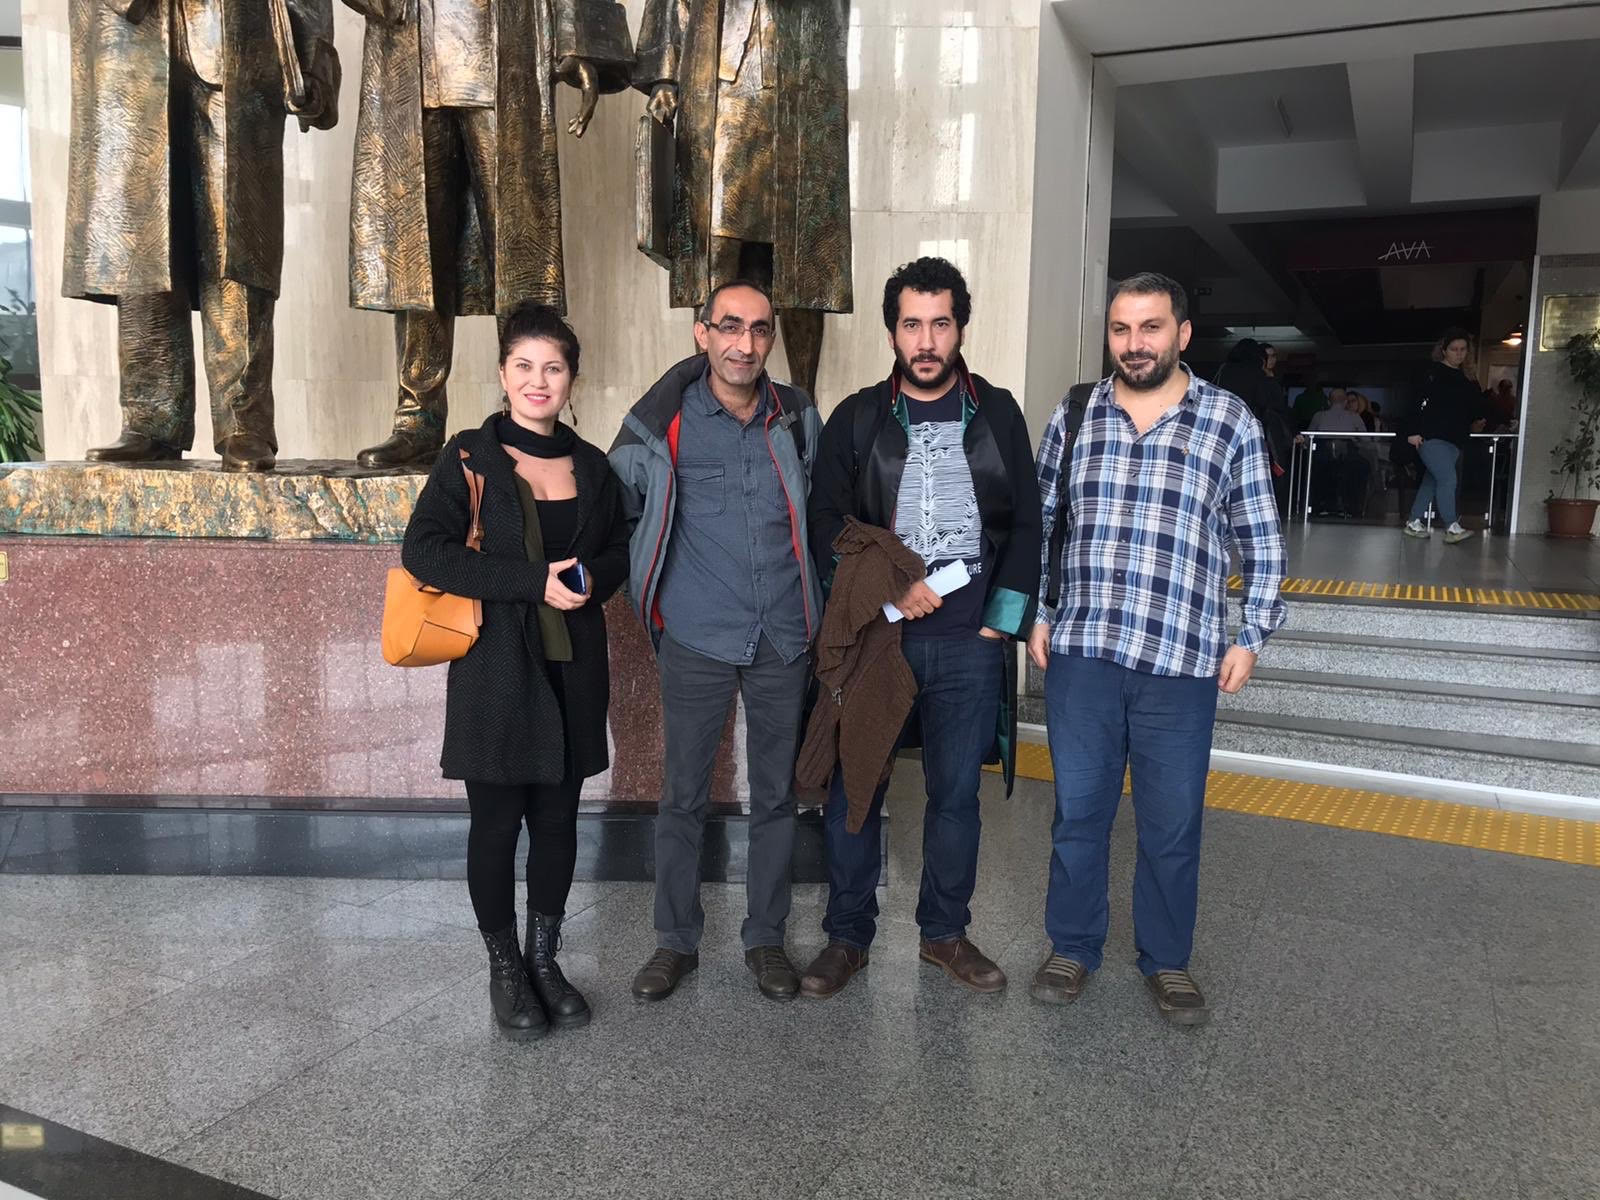 Fatih Polat acquitted of “insulting the president”